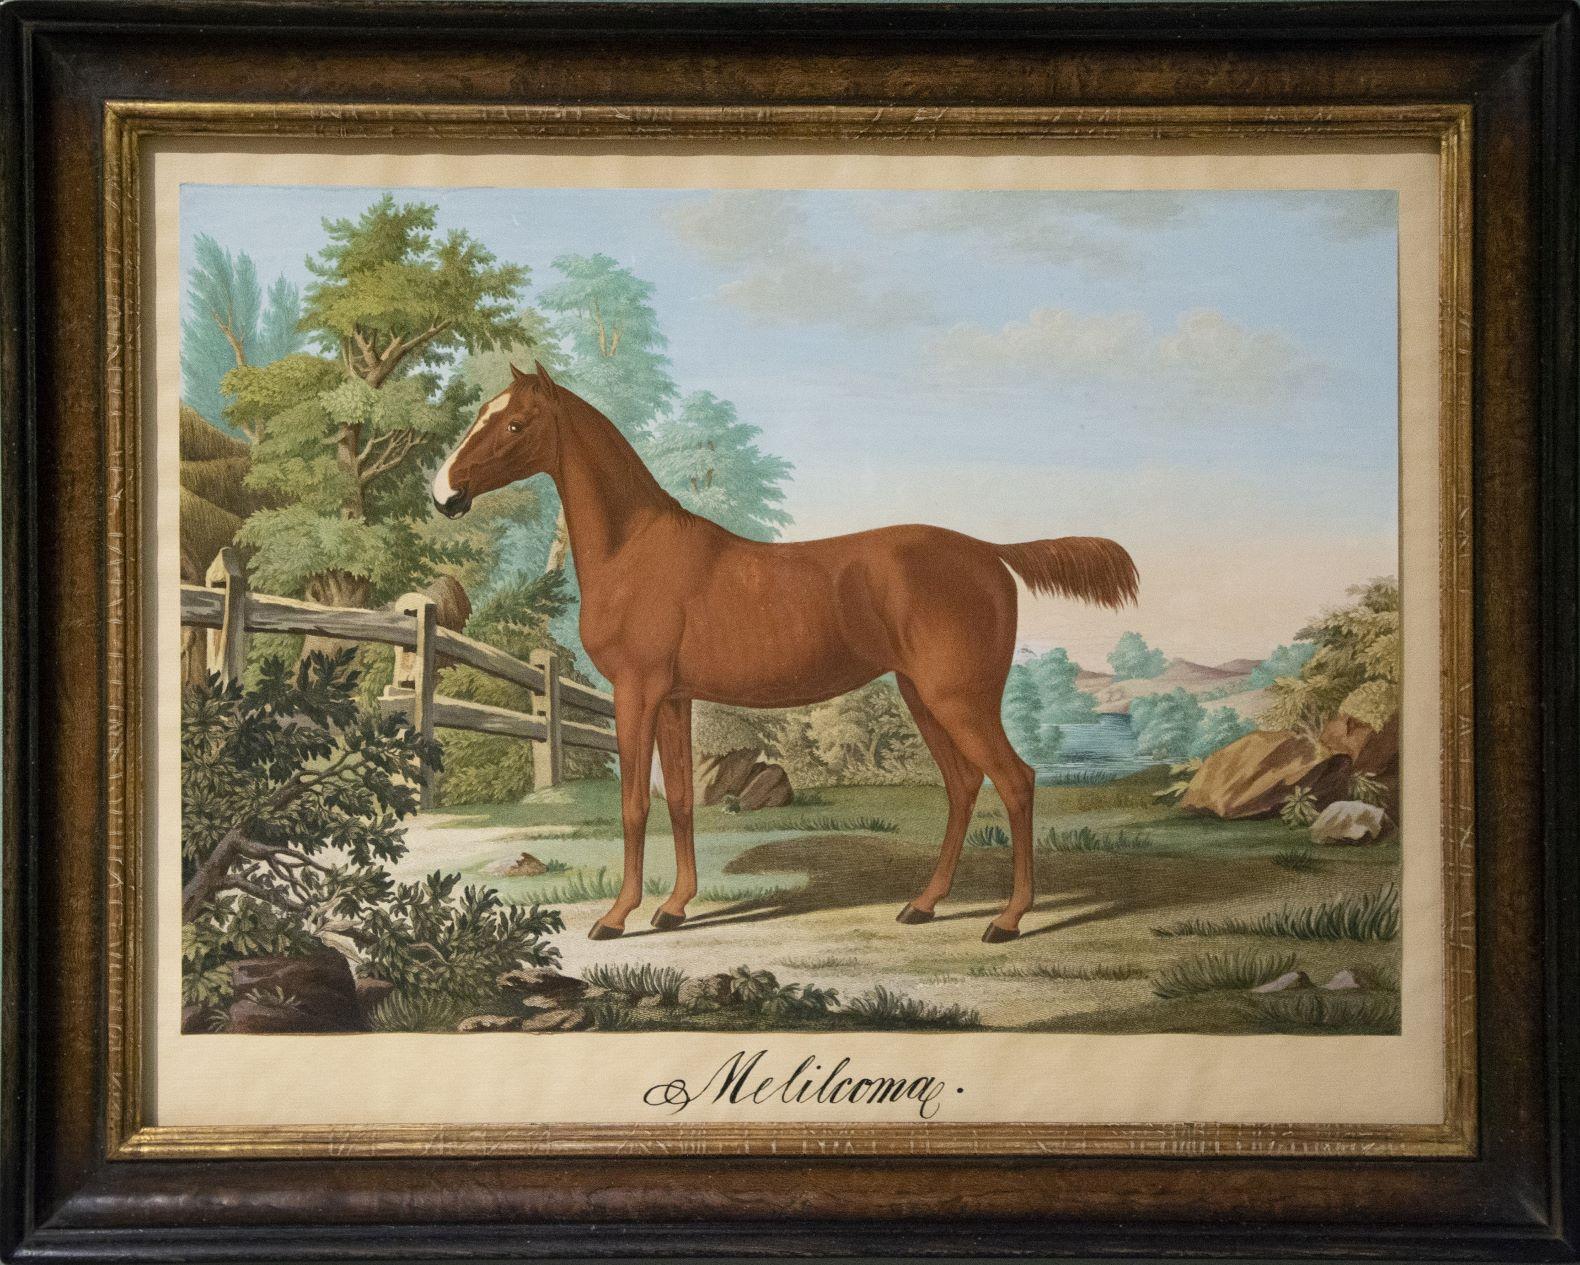 [A Pair of Horses] ‘Gentle Kitty’ and ‘Melilcoma’. - Print by Johann Meno Haas 